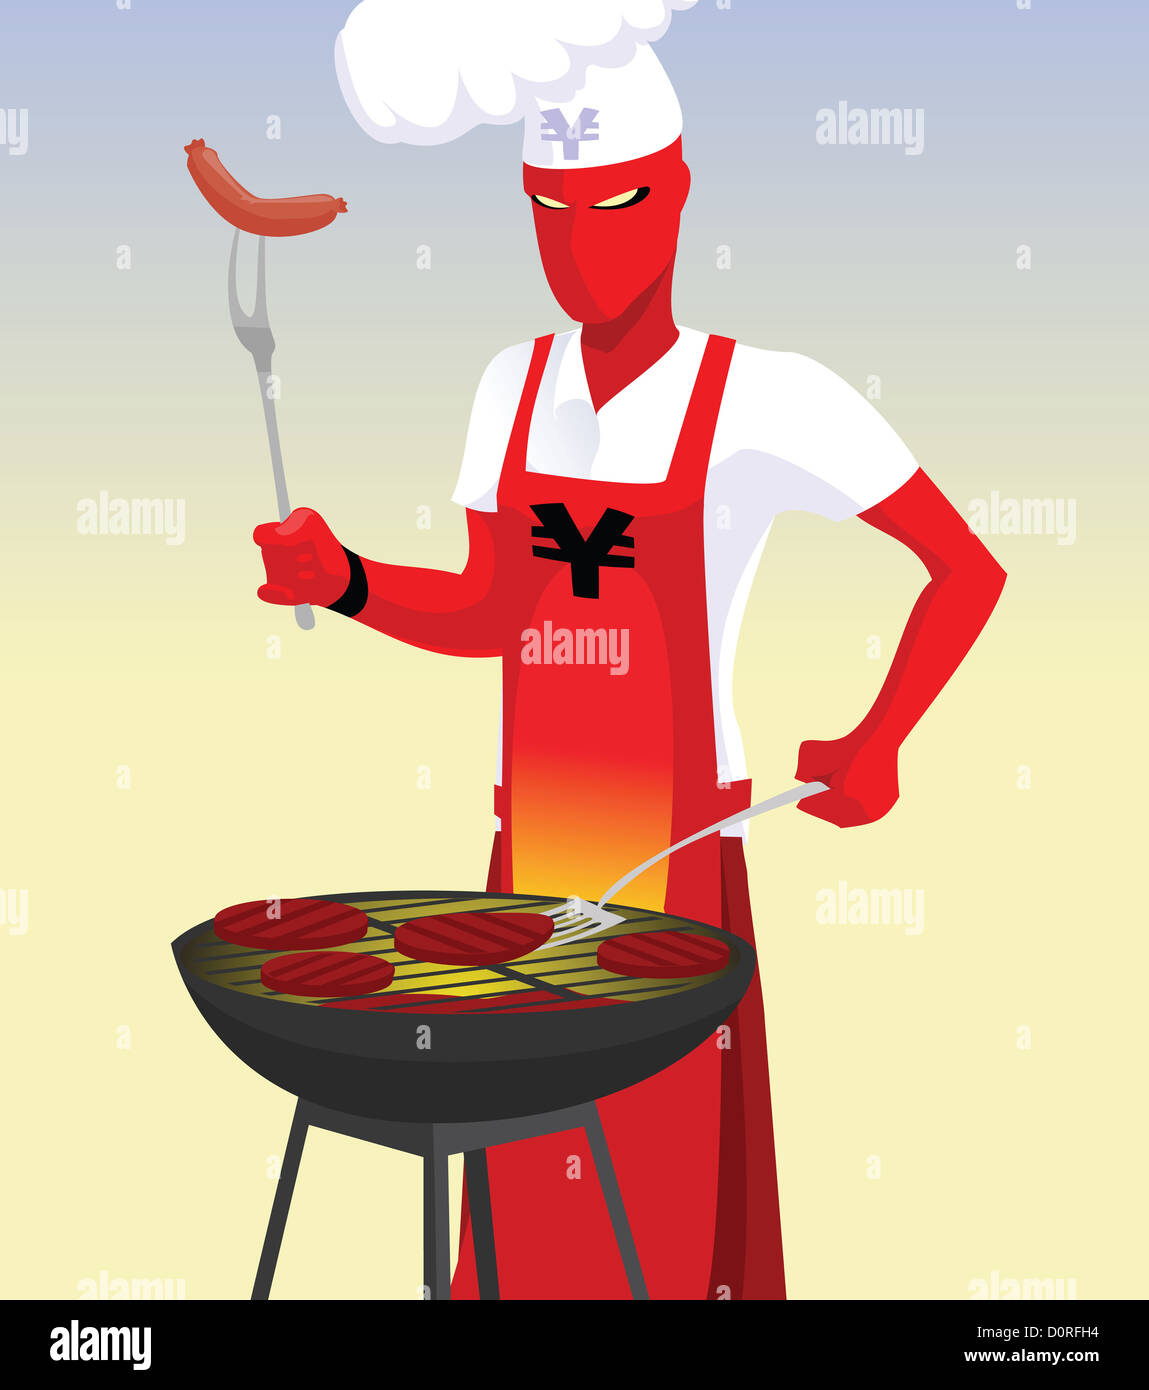 Super hero in chef's whites preparing food on a barbecue Stock Photo